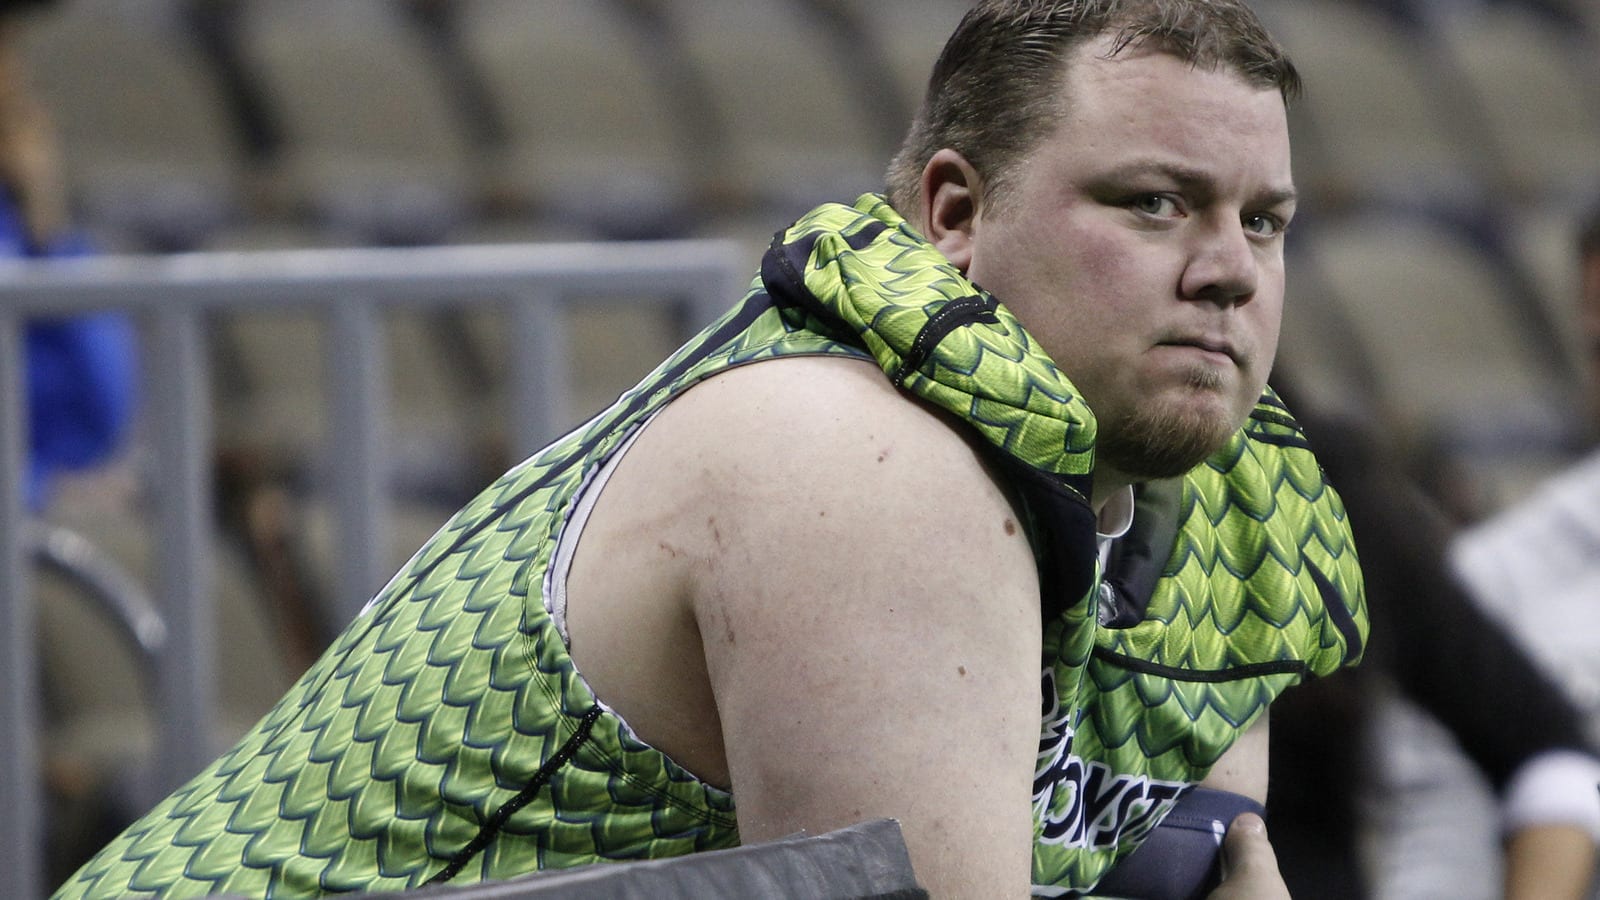 Jared Lorenzen launches weight-loss project after hitting 500 pounds